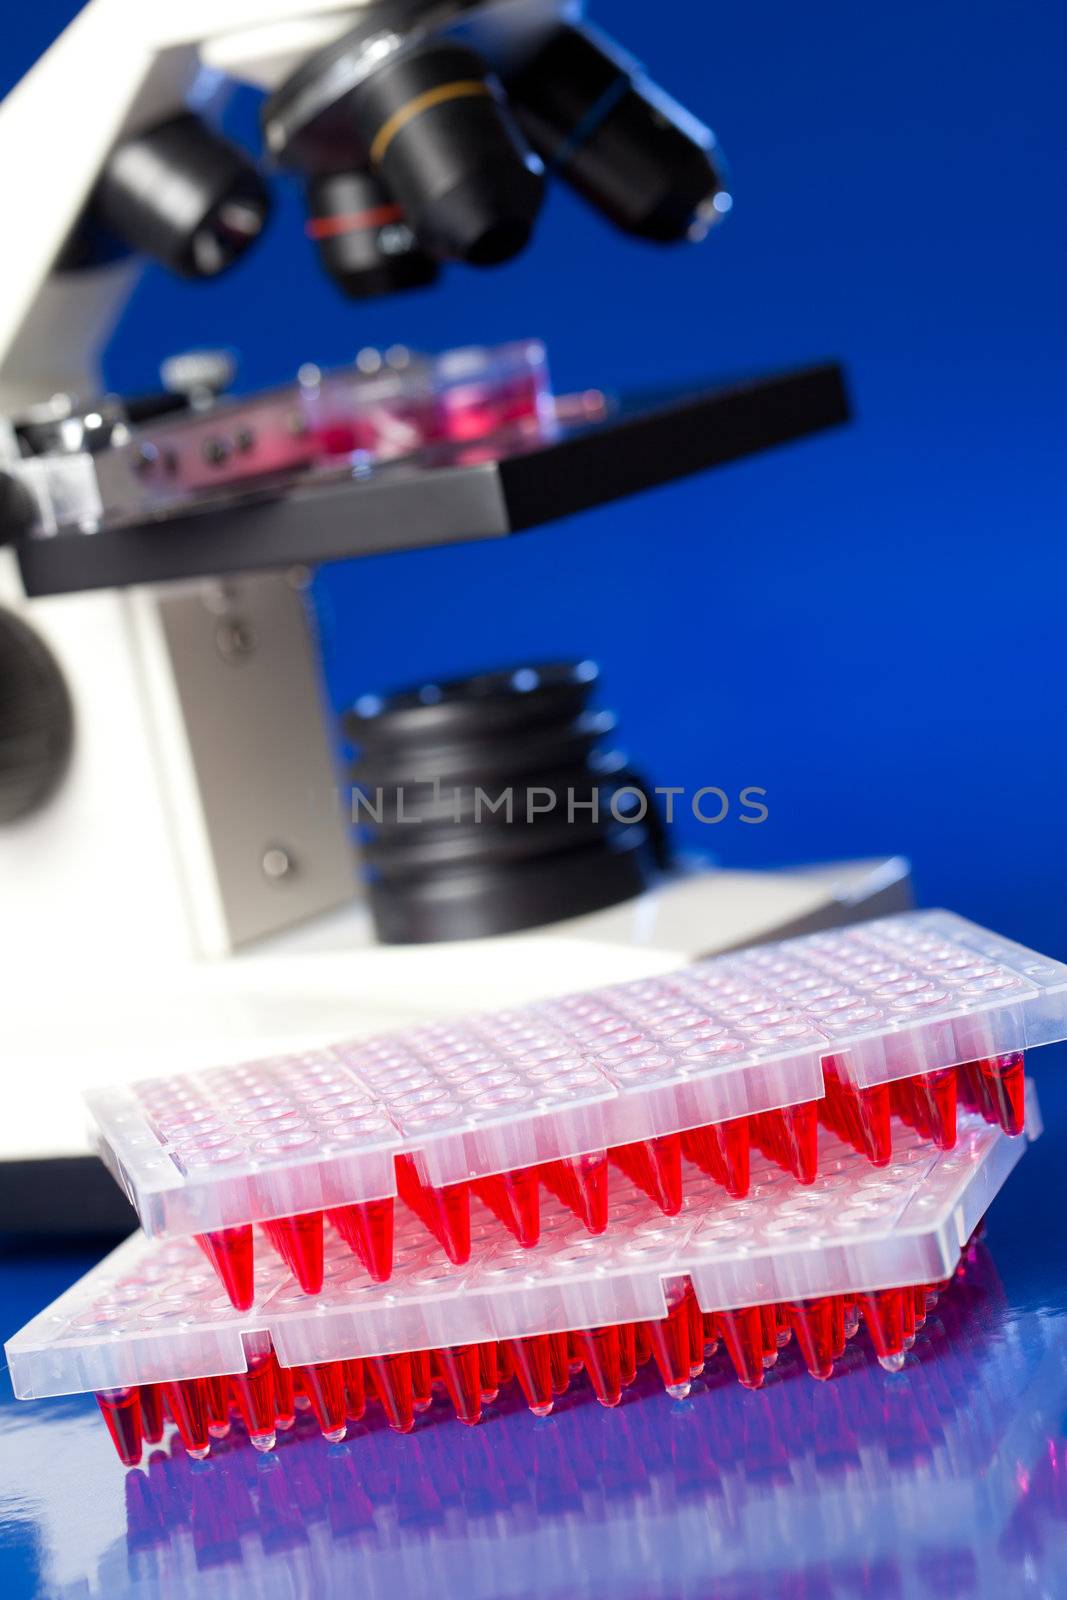 96 well plates on lab table with red liquid samples